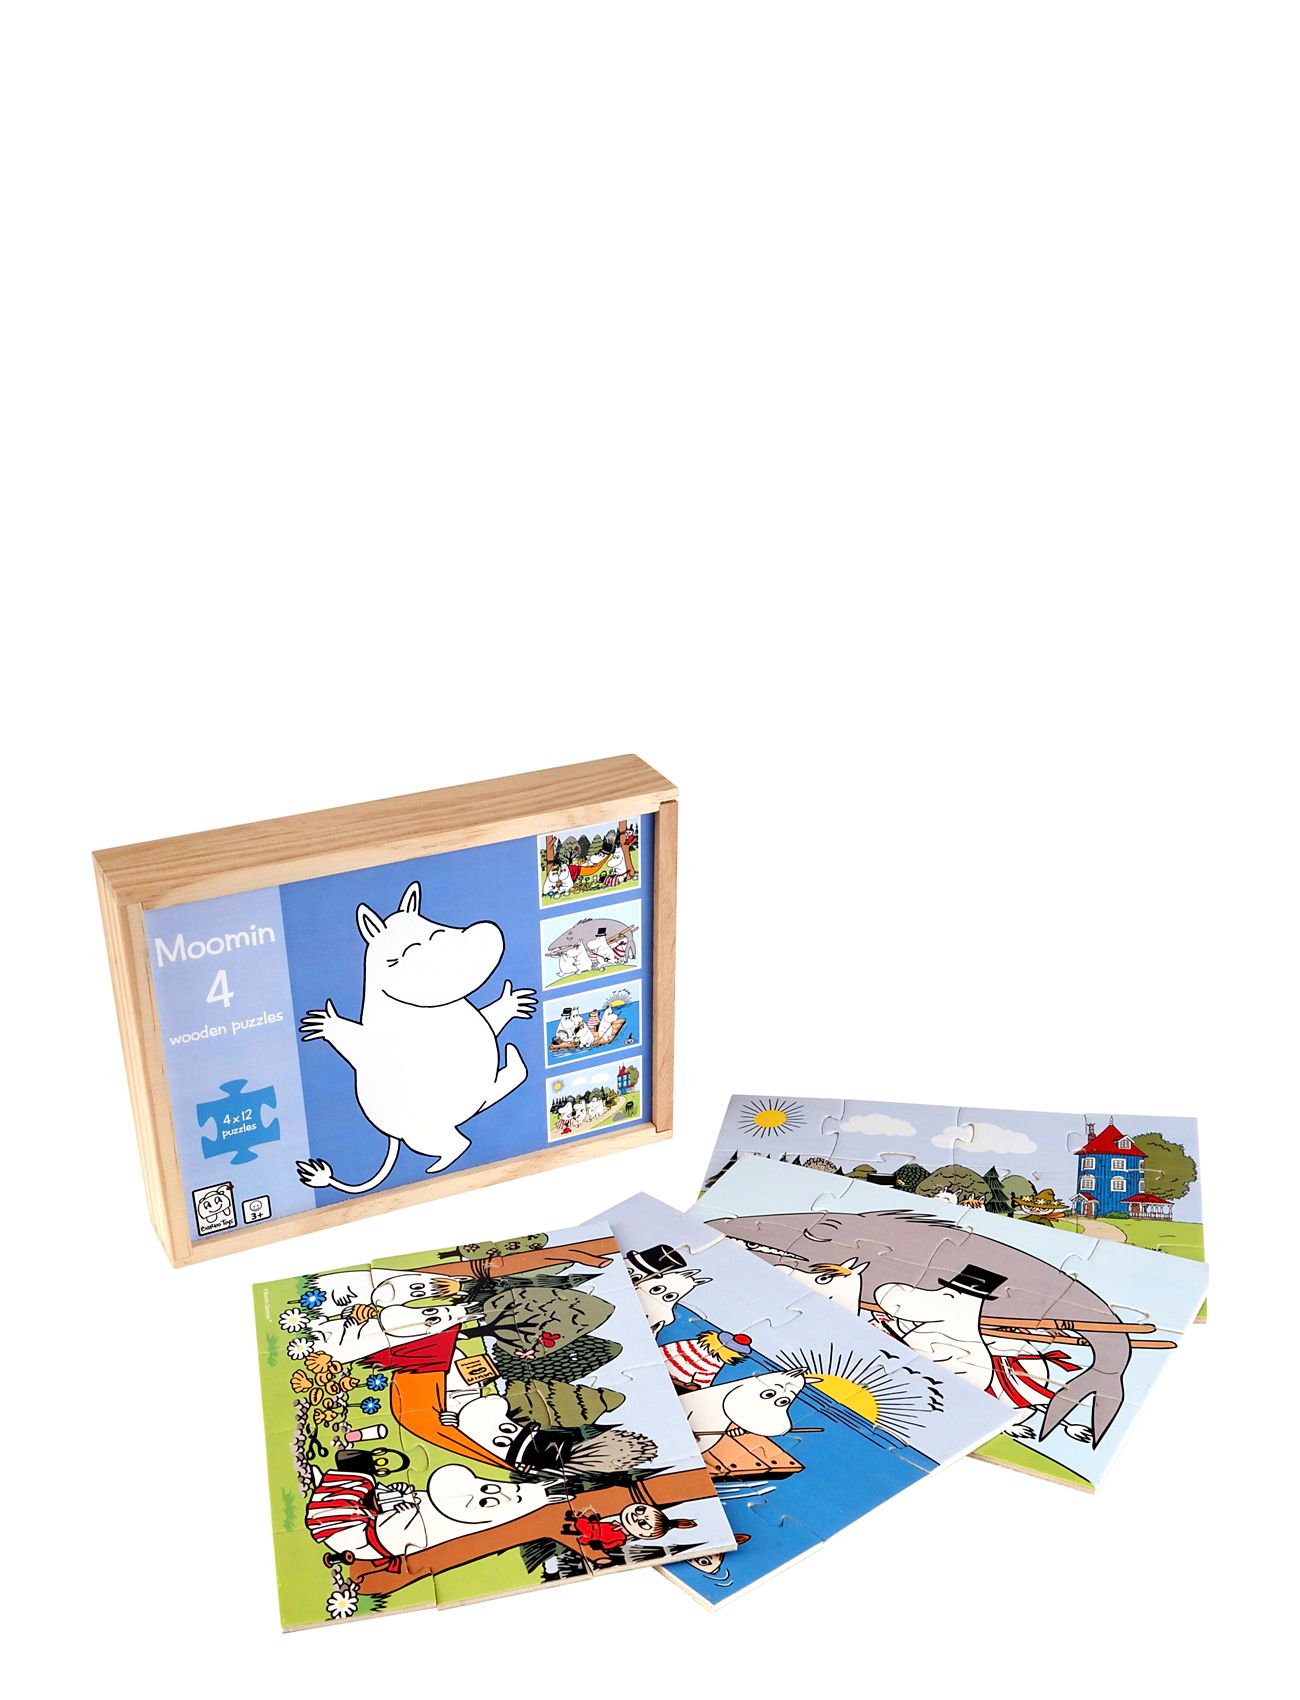 Moomin 4 Wooden Puzzles In A Box Toys Puzzles And Games Puzzles Wooden Puzzles Multi/patterned MUMIN